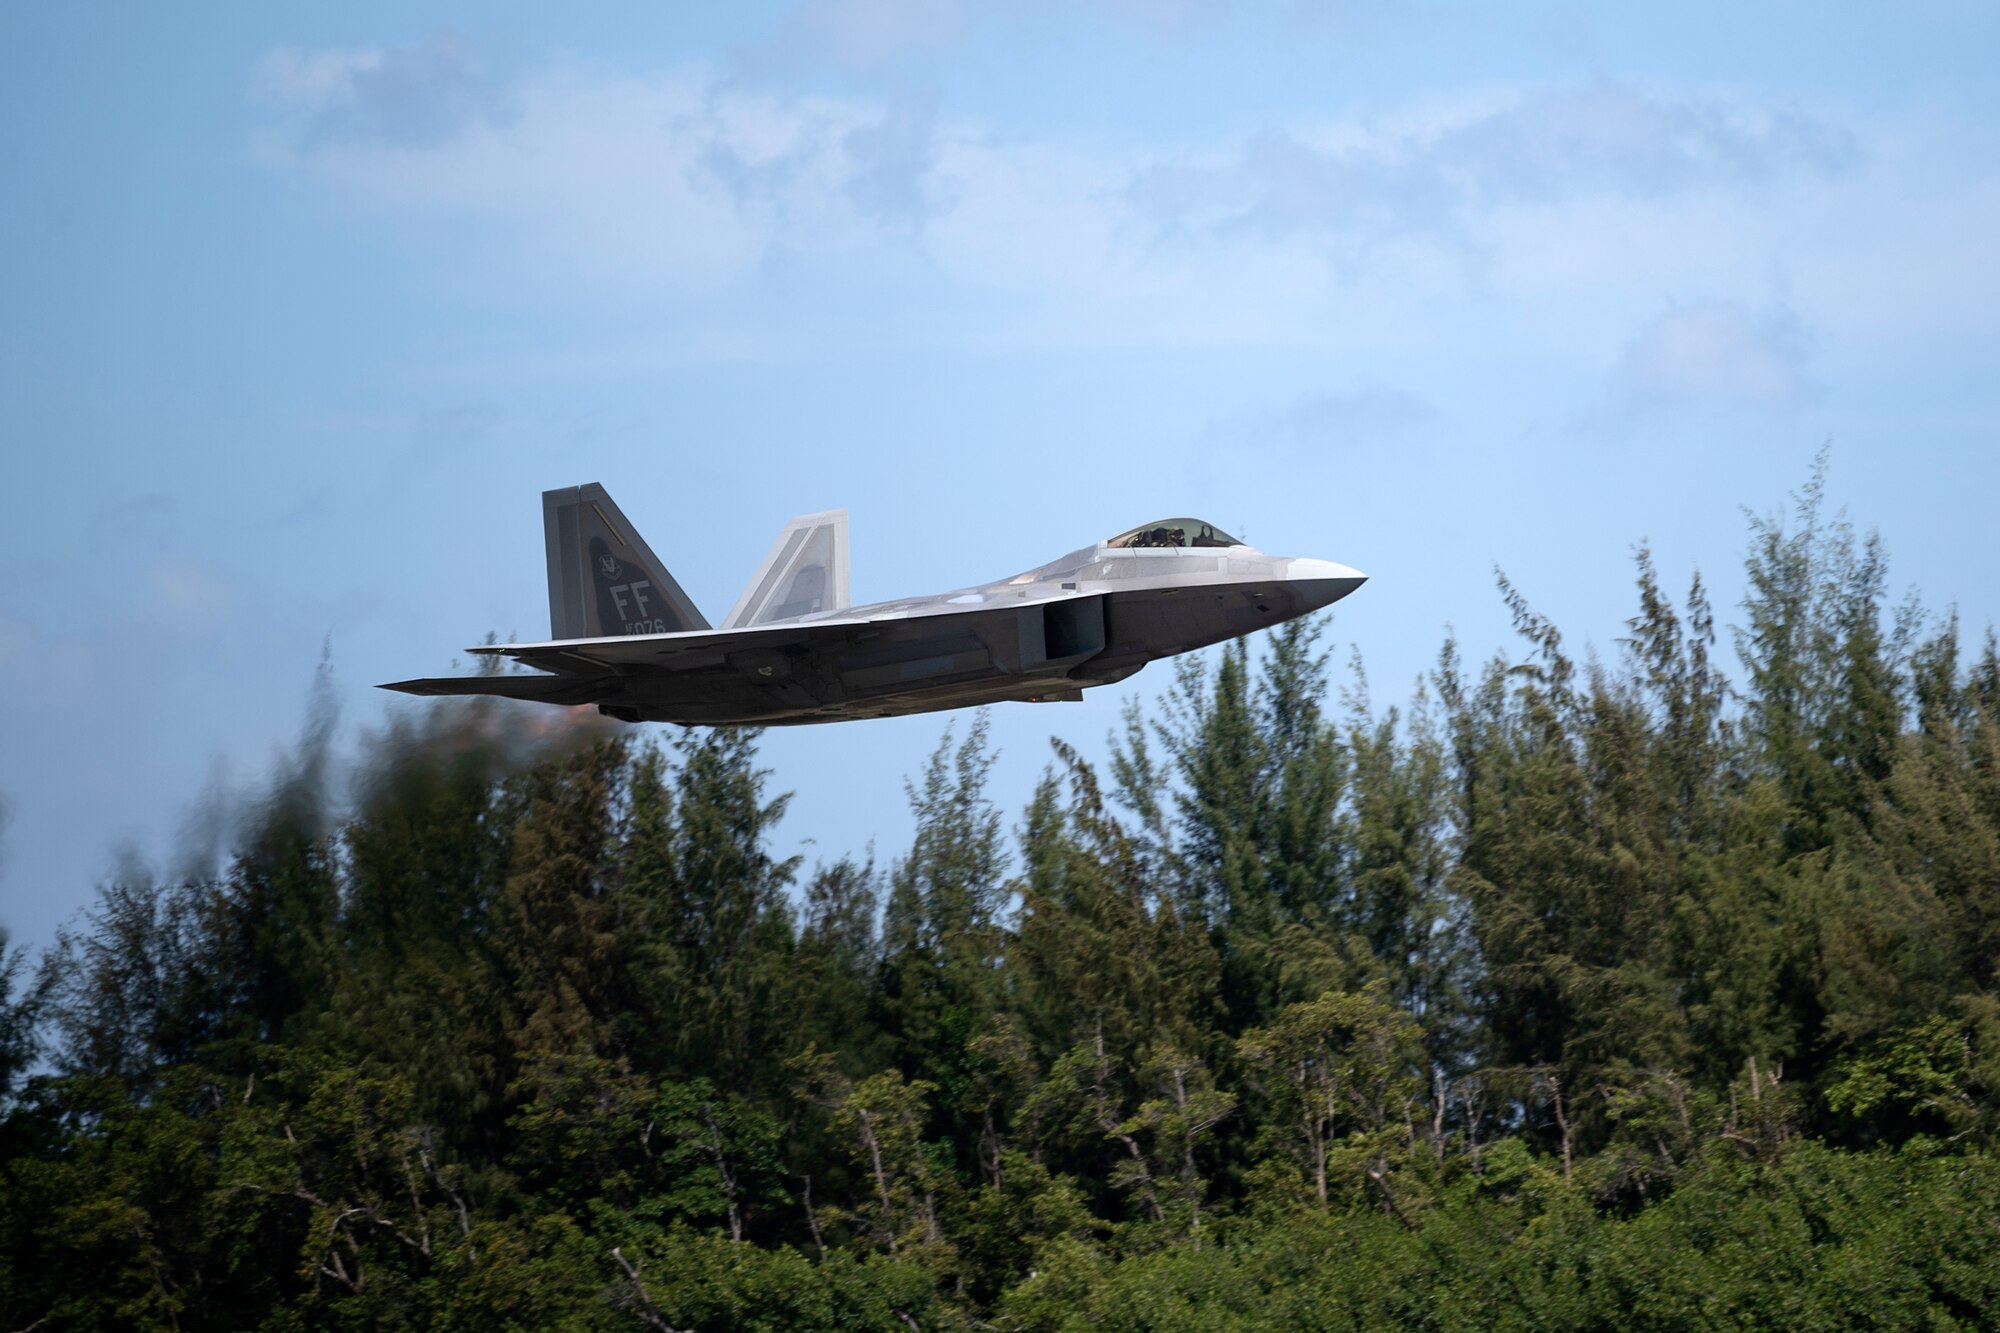 An F-22 Raptor assigned to the 192nd Wing, Virginia Air National Guard, departs the 156th Wing airfield during Operation Hoodoo Sea at Muñiz Air National Guard Base, Carolina, Puerto Rico, May 4, 2023. Operation Hoodoo Sea is a multi-unit training exercise where participant units conduct agile combat training in the coastal southeast of the U.S. to test agile communications innovations, portable aerospace ground equipment, aircraft concealment hangars and survival kits. (U.S. Air National Guard photo by Master Sgt. Rafael Rosa)